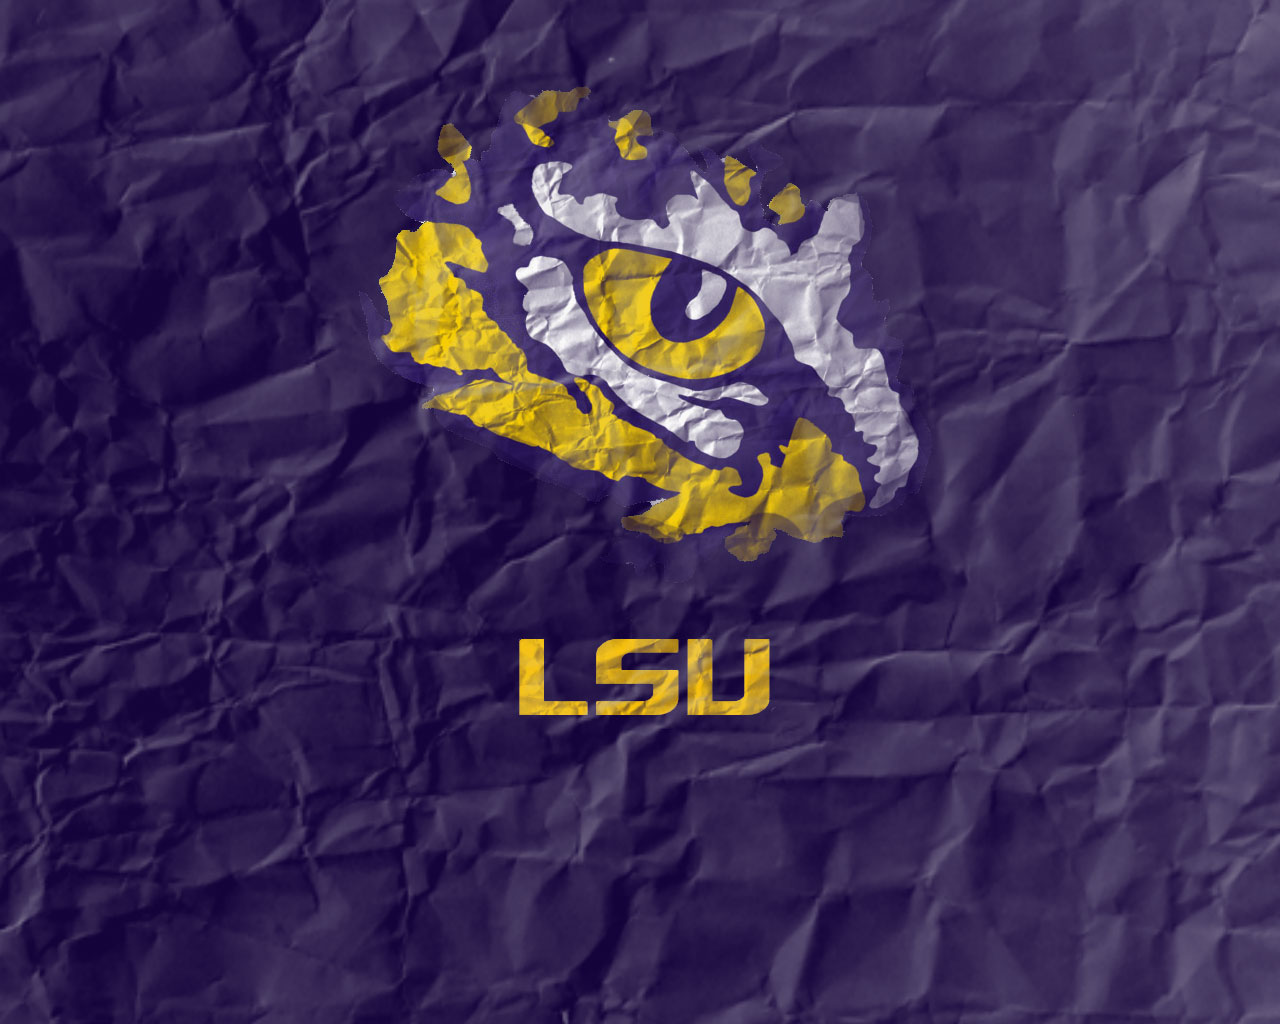 Lsu Eye Of The Tiger Wallpaper For Phones And Tablets